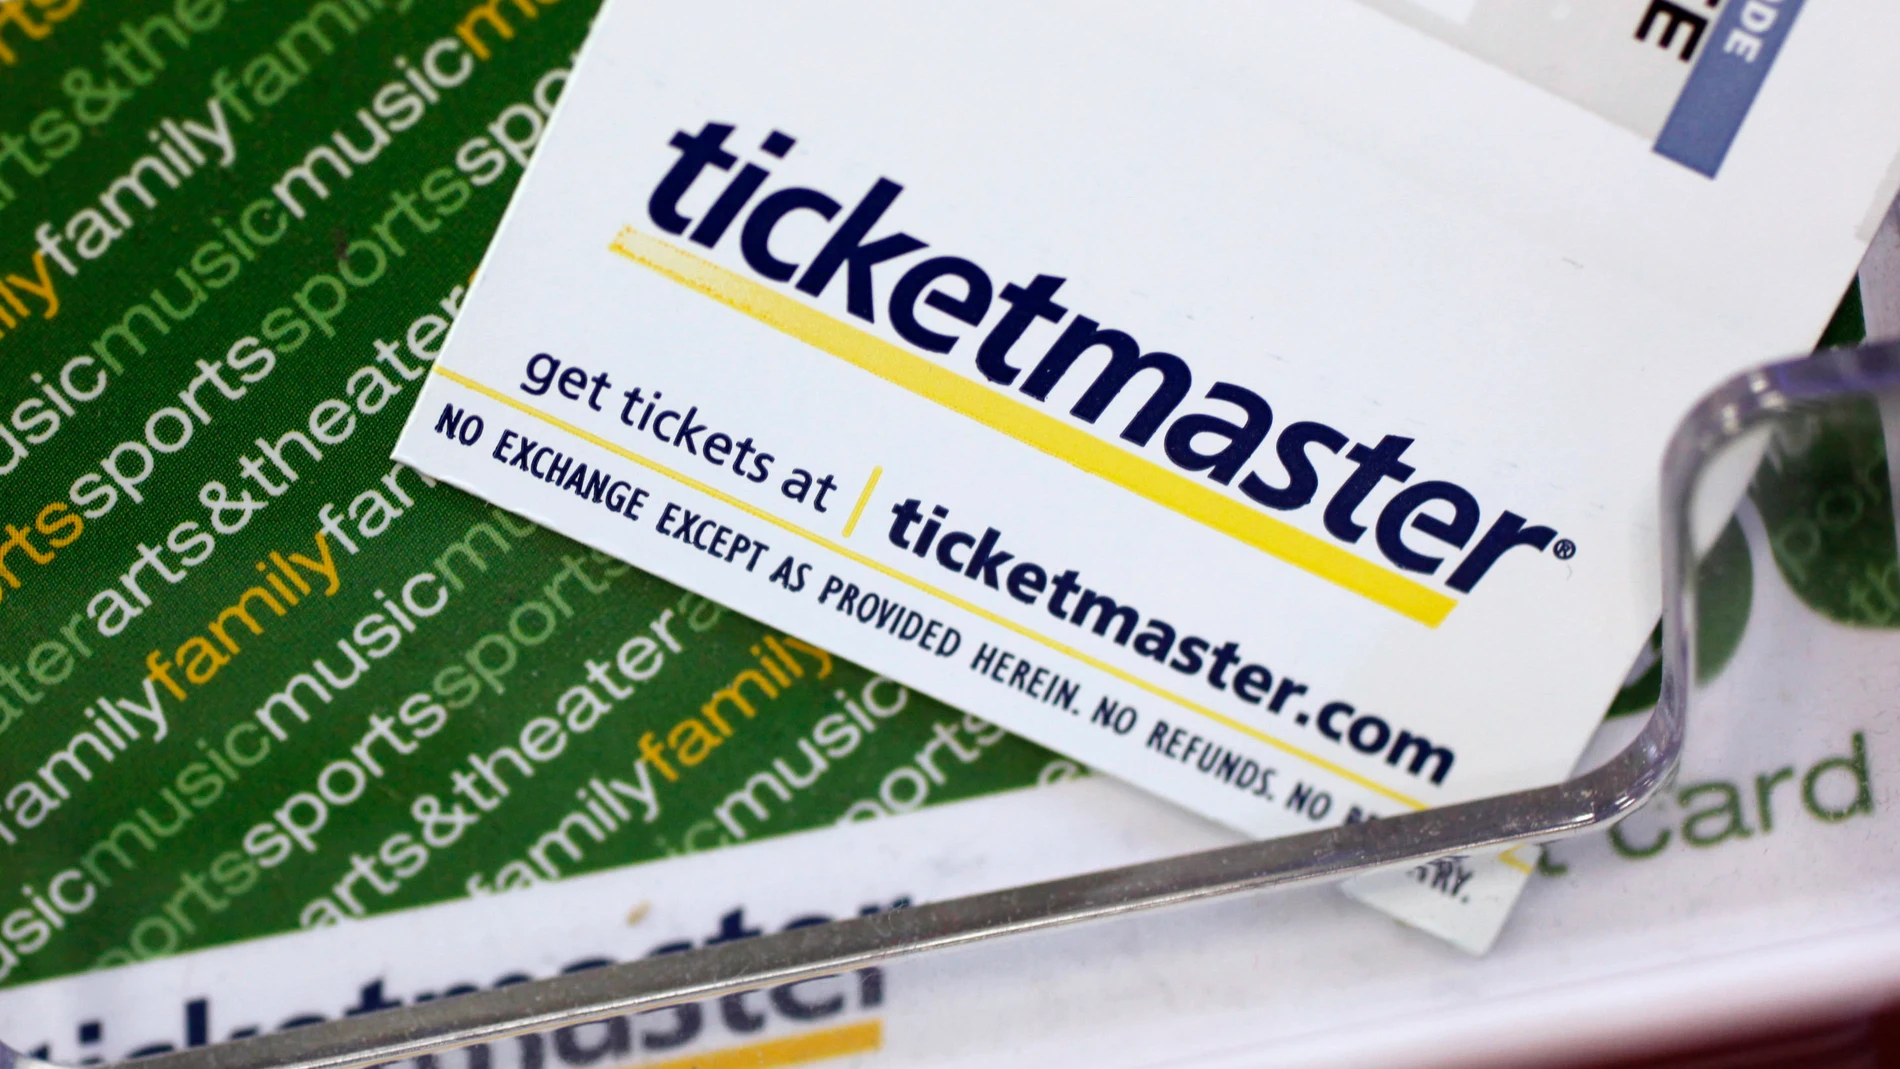 FILE - Ticketmaster tickets and gift cards are shown at a box office in San Jose, Calif., May 11, 2009. The Justice Department has filed a sweeping antitrust lawsuit against Ticketmaster and its parent company, Live Nation Entertainment, accusing the companies of running an illegal monopoly over live events in America and squelching competition. (AP Photo/Paul Sakuma, File)